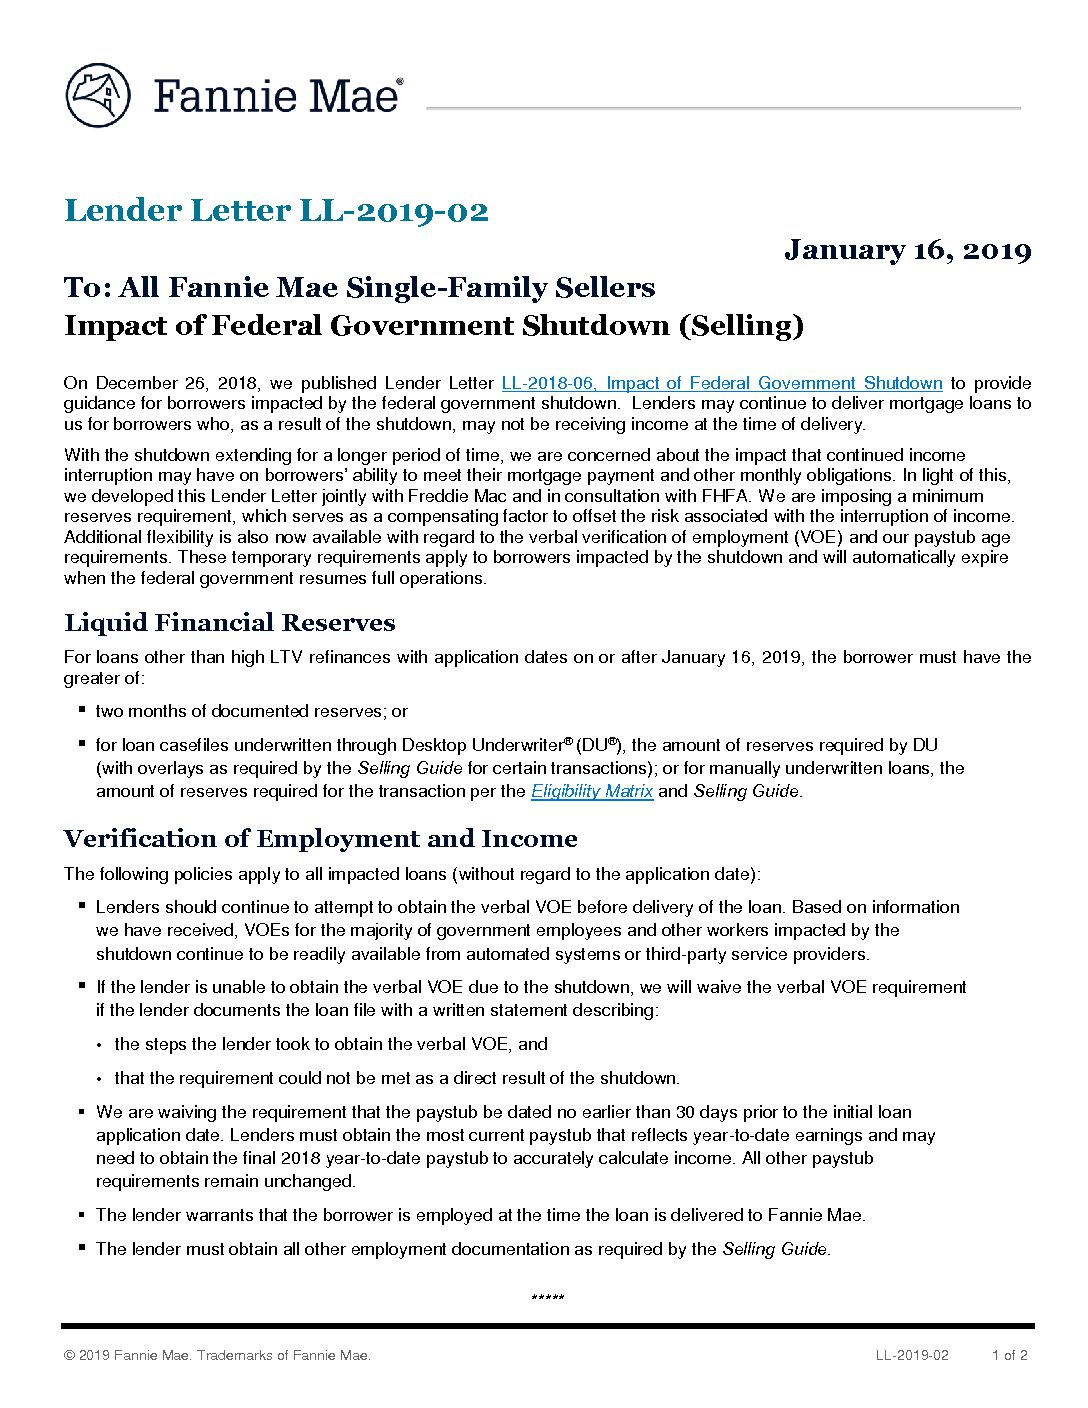 Click Here to View the Fannie Mae Lender Letter LL201902 TENA